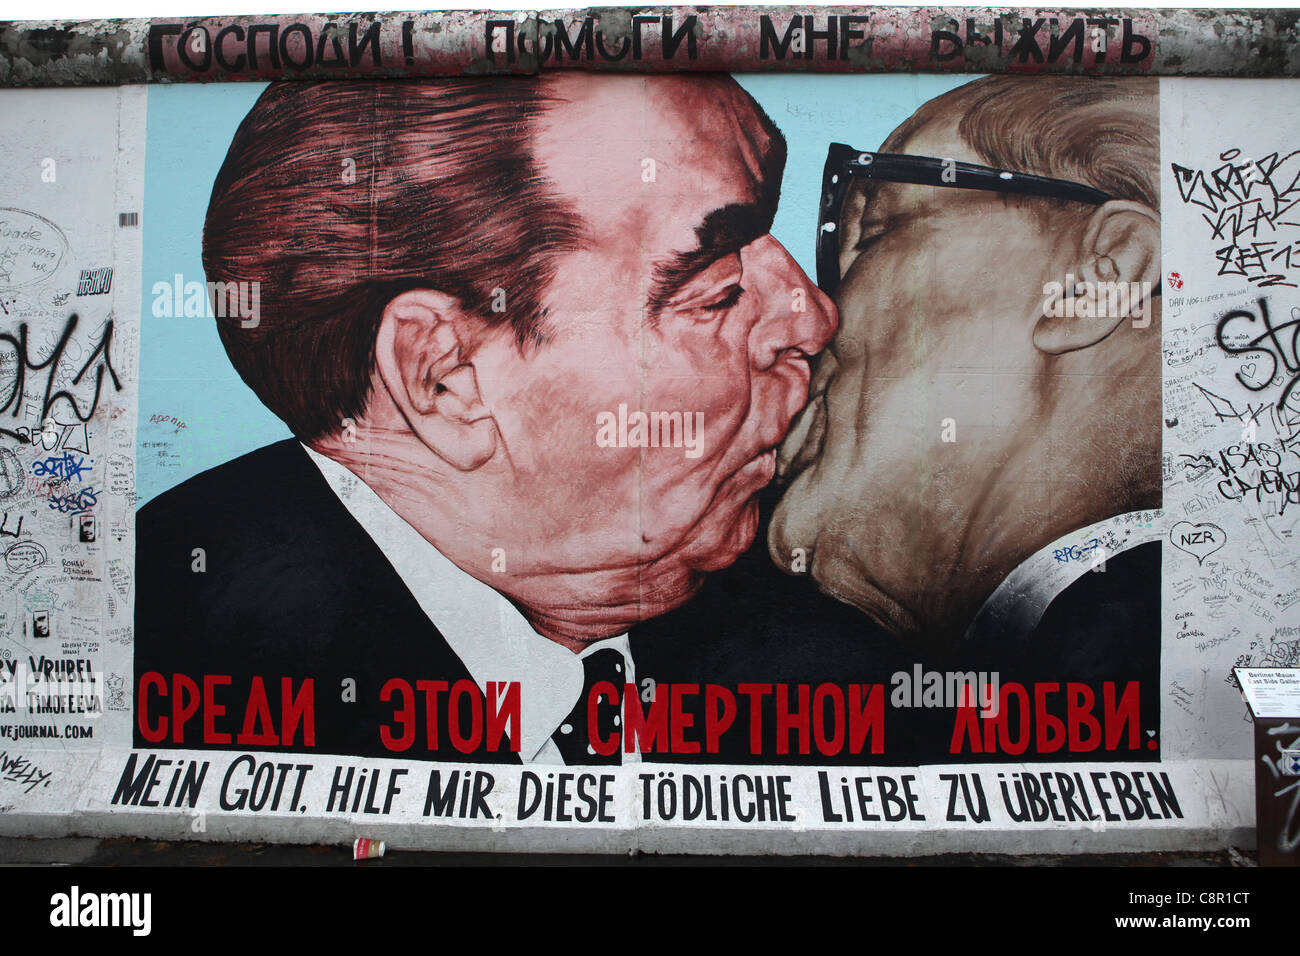 Leonid Brezhnev and Erich Honecker’s kiss pictured on the Berlin Wall in East Side Gallery in Berlin, Germany. Stock Photo